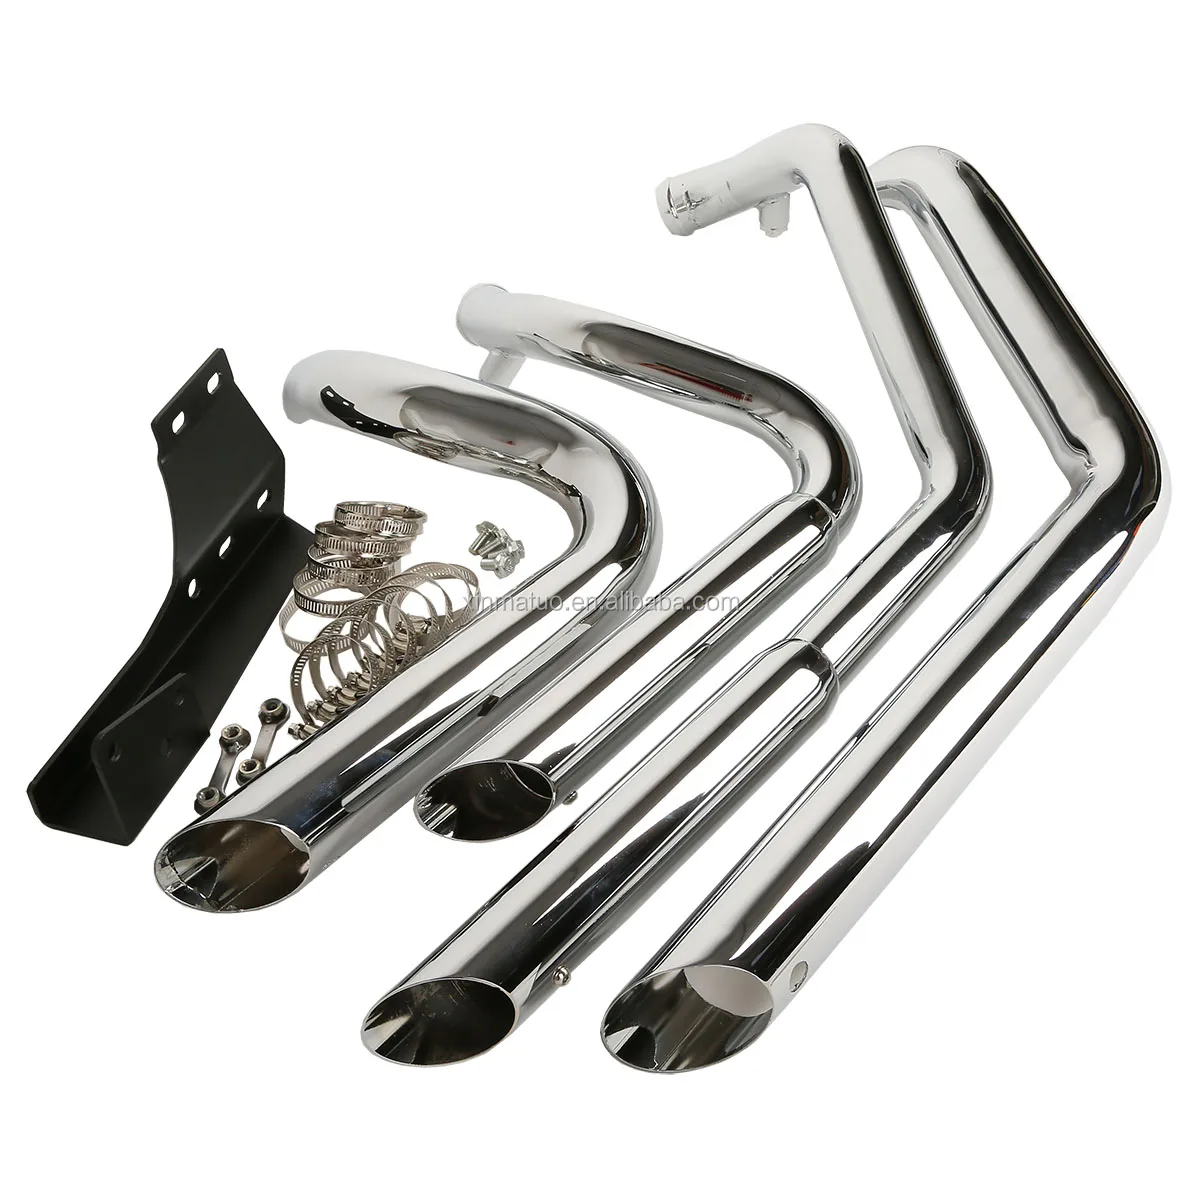 Chrome 2/" Drag Pipes Exhaust Harley Sportster XL 883 1200 04-13